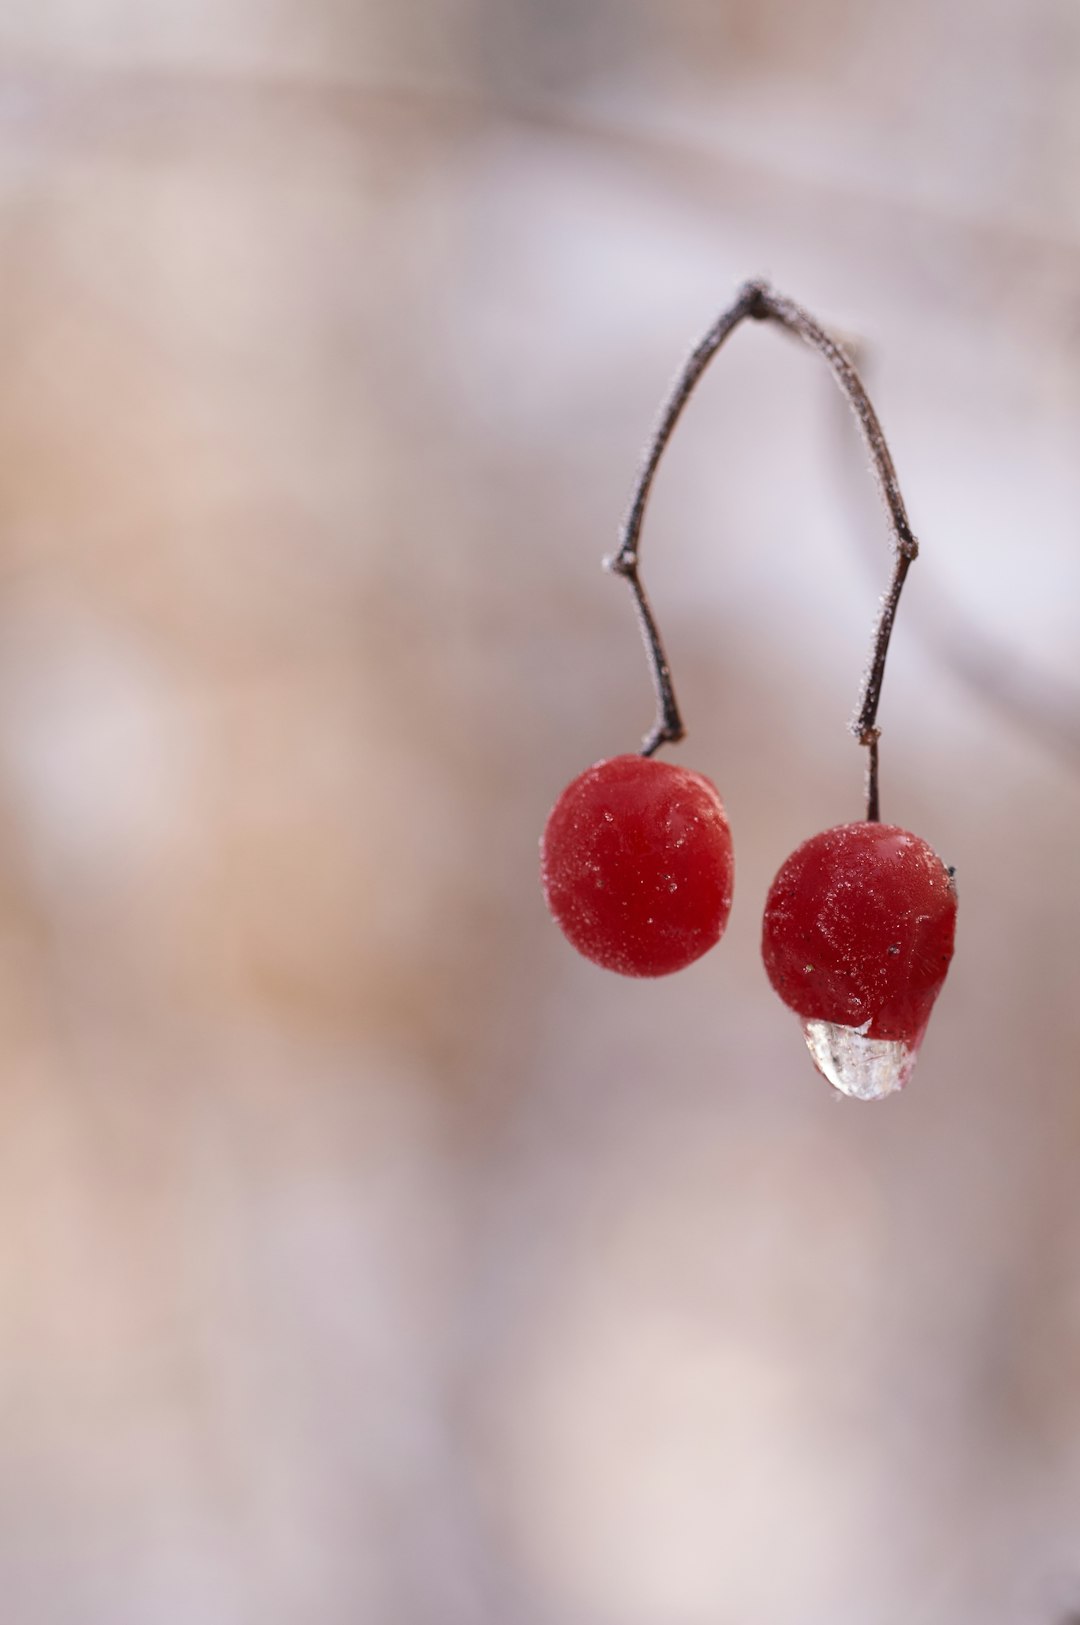 round red fruit with water droplet